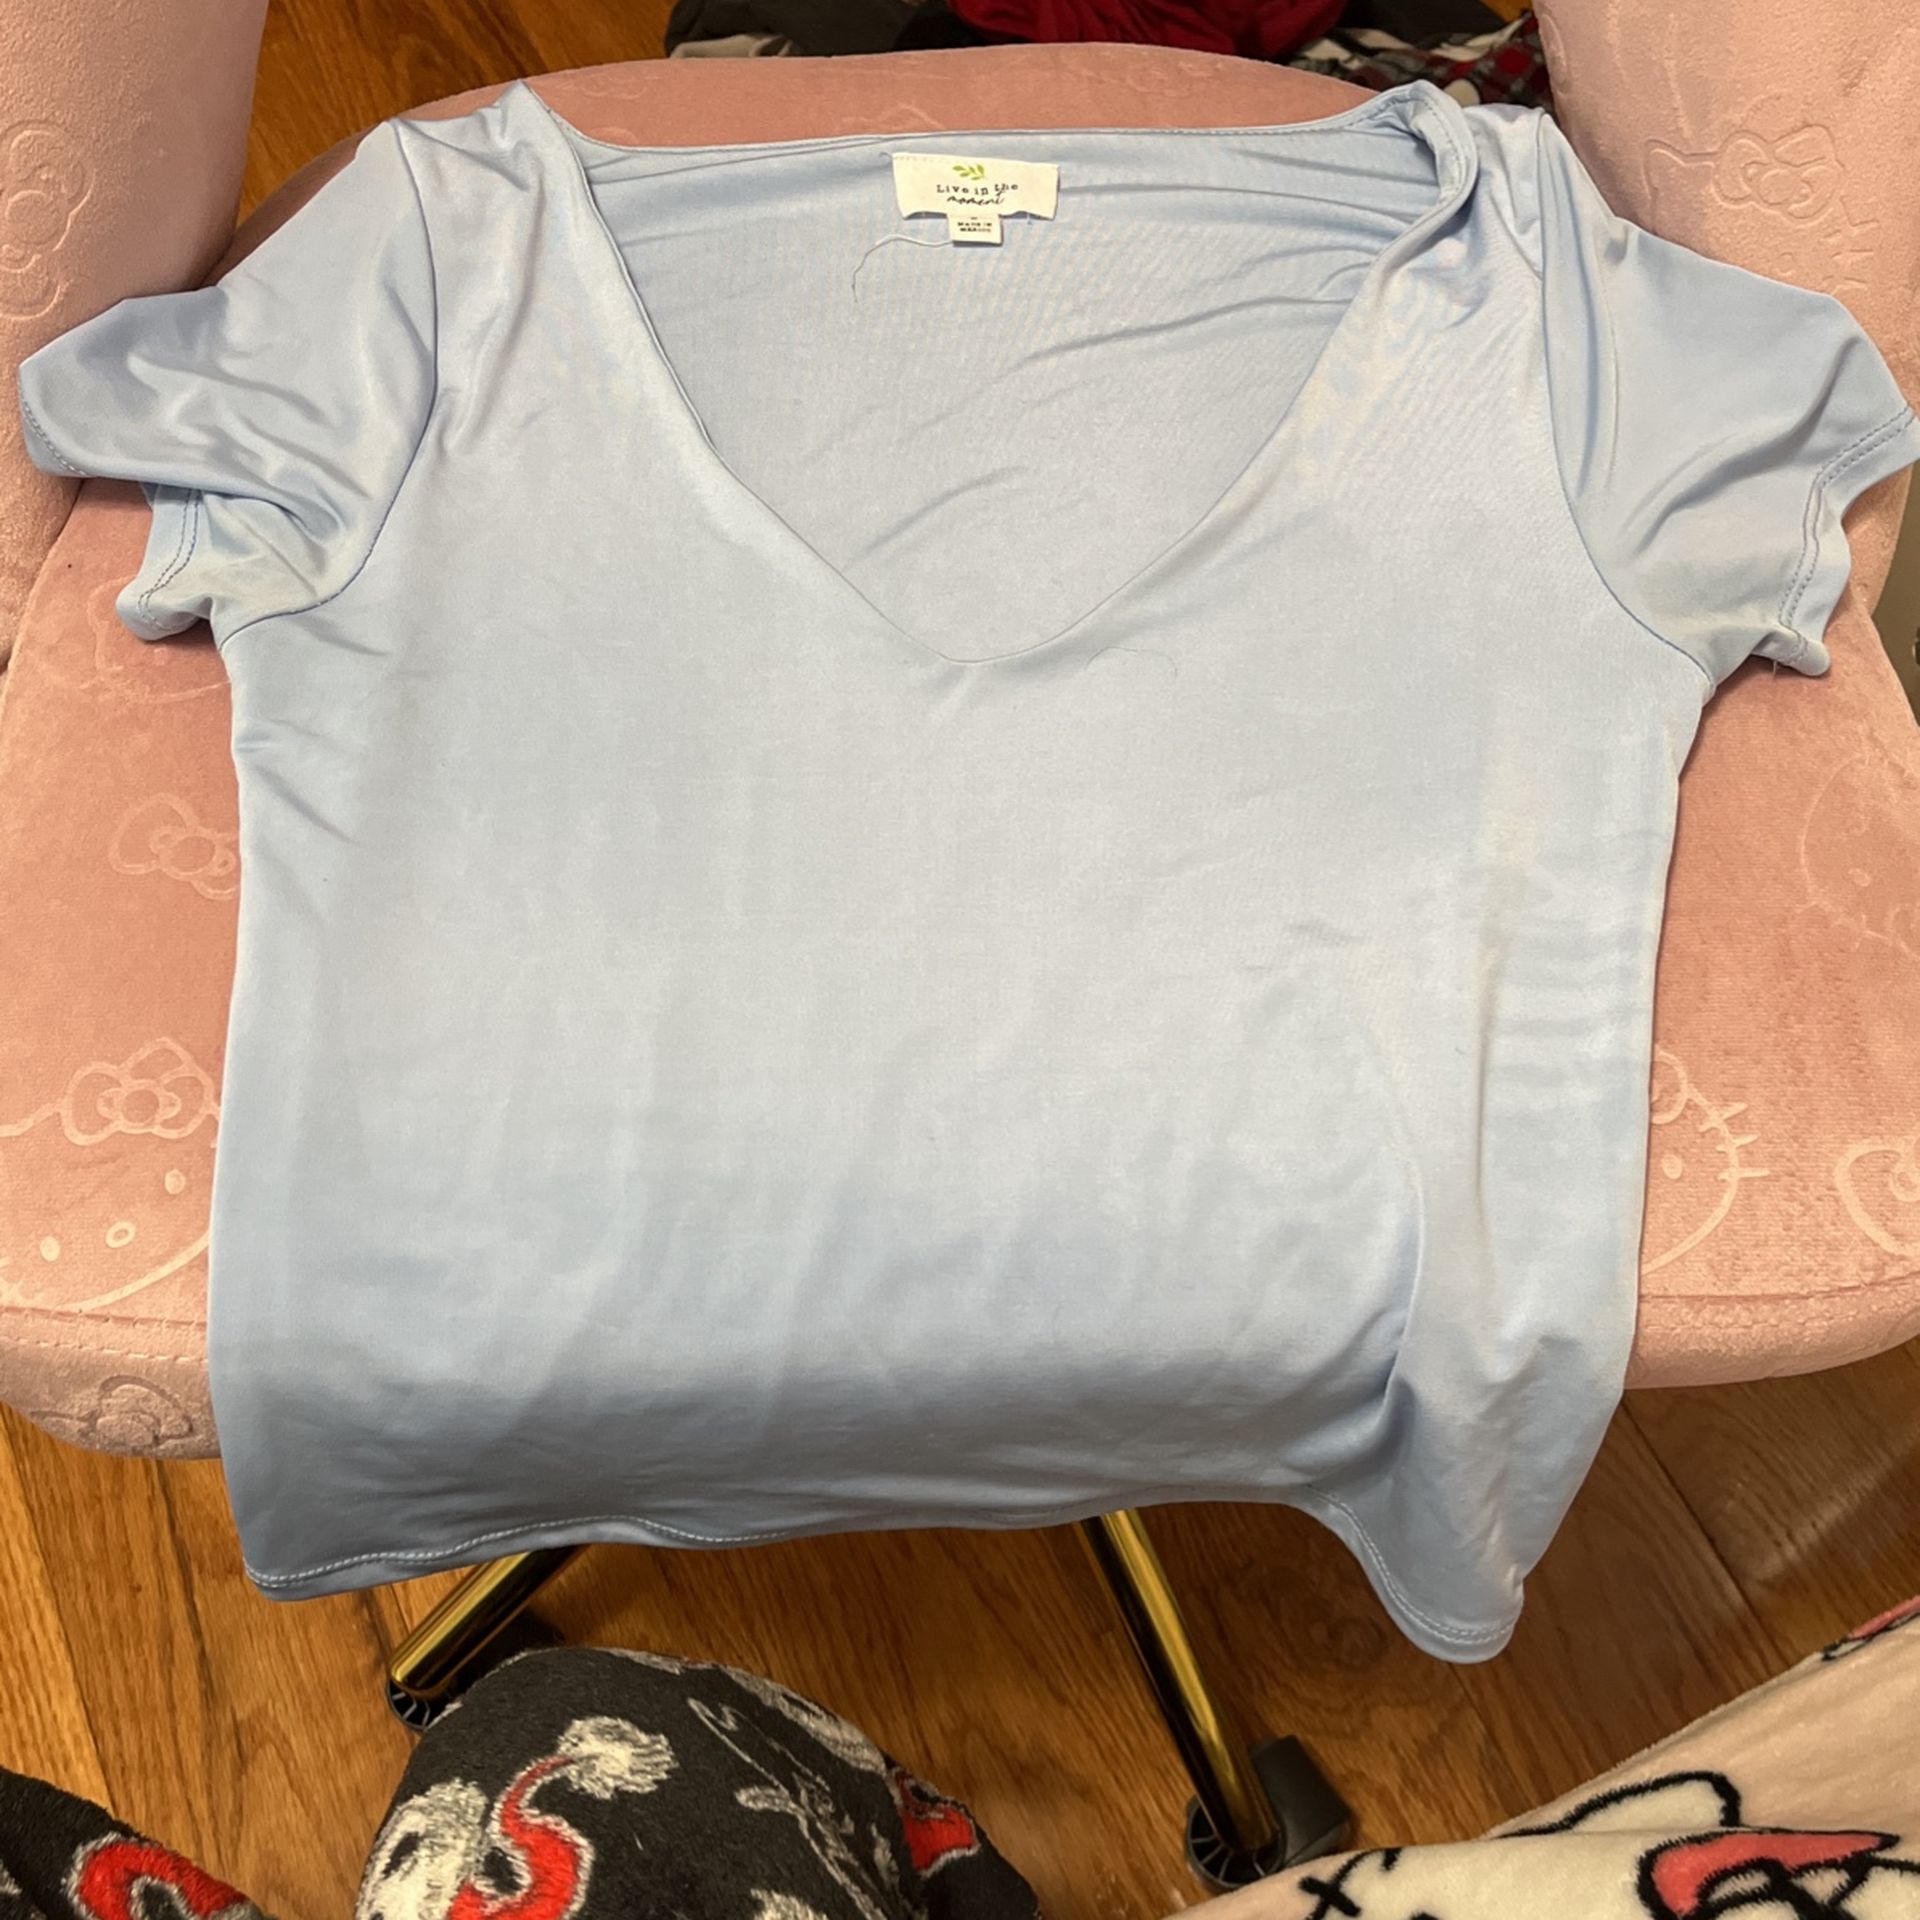 V Neck Top From Marshall’s 